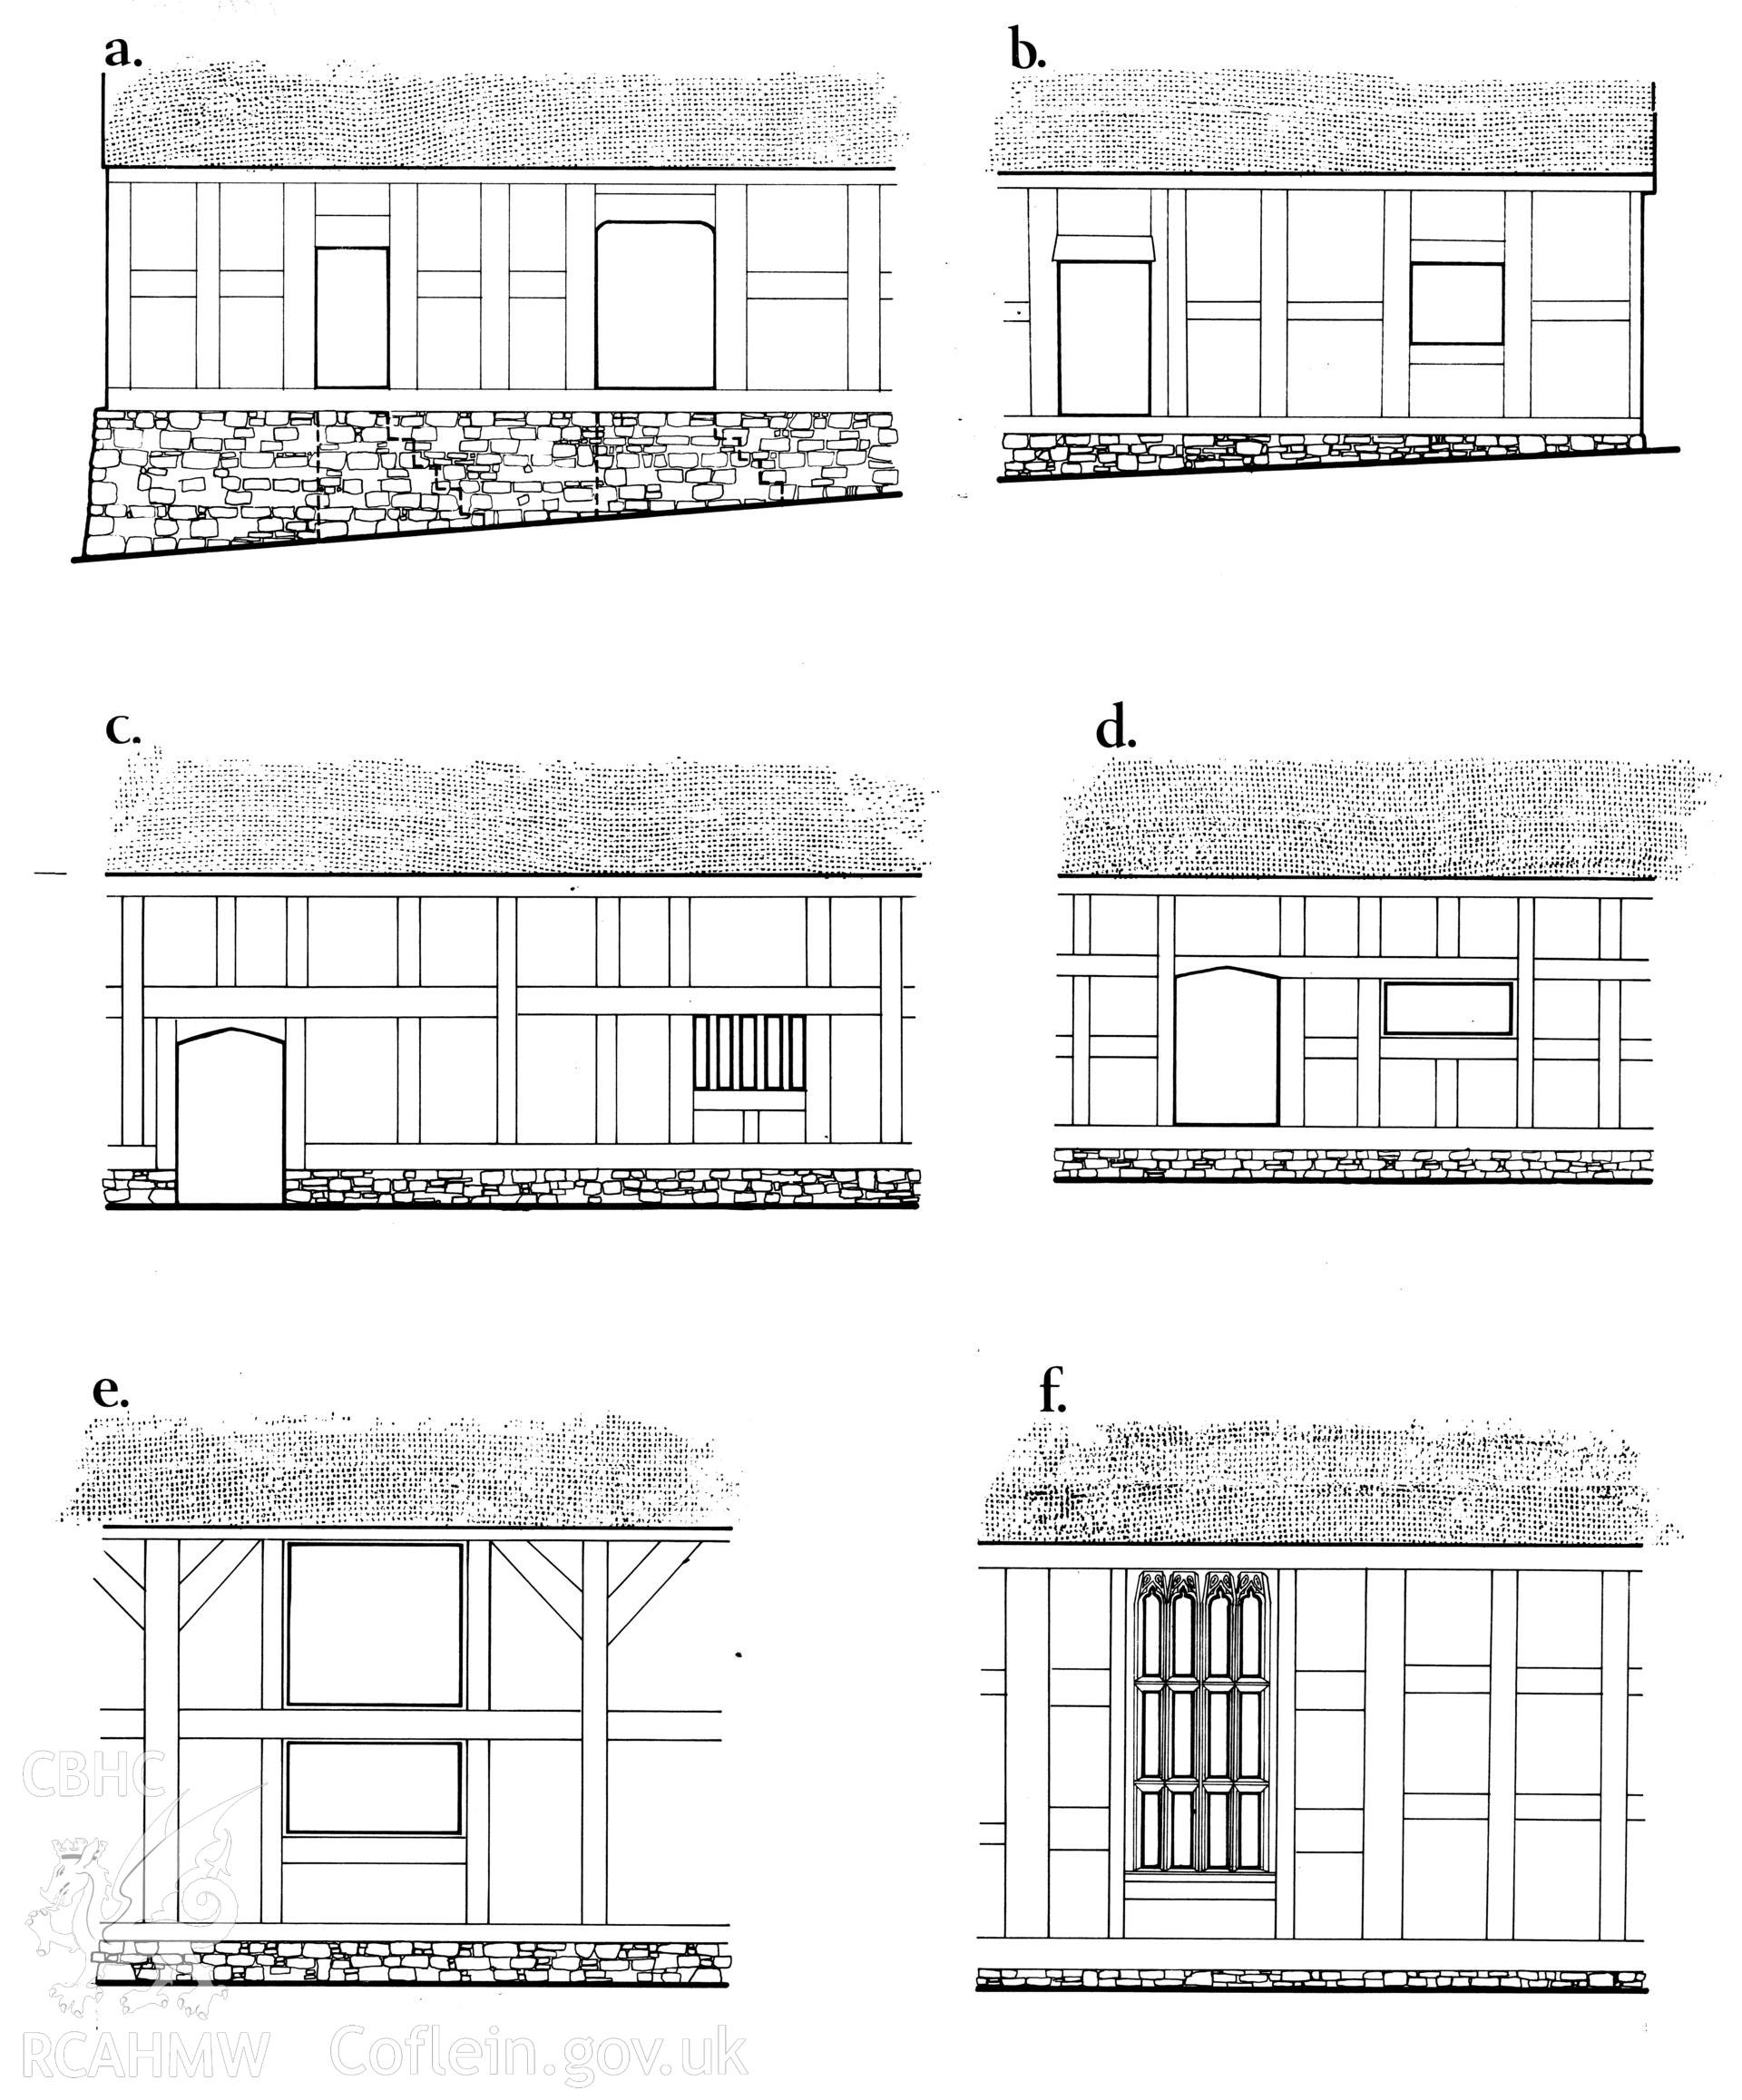 Multi site RCAHMW drawing, 6 sites, showing detail of half-timbered houses.  Published in Houses of the Welsh Countryside, fig 43.